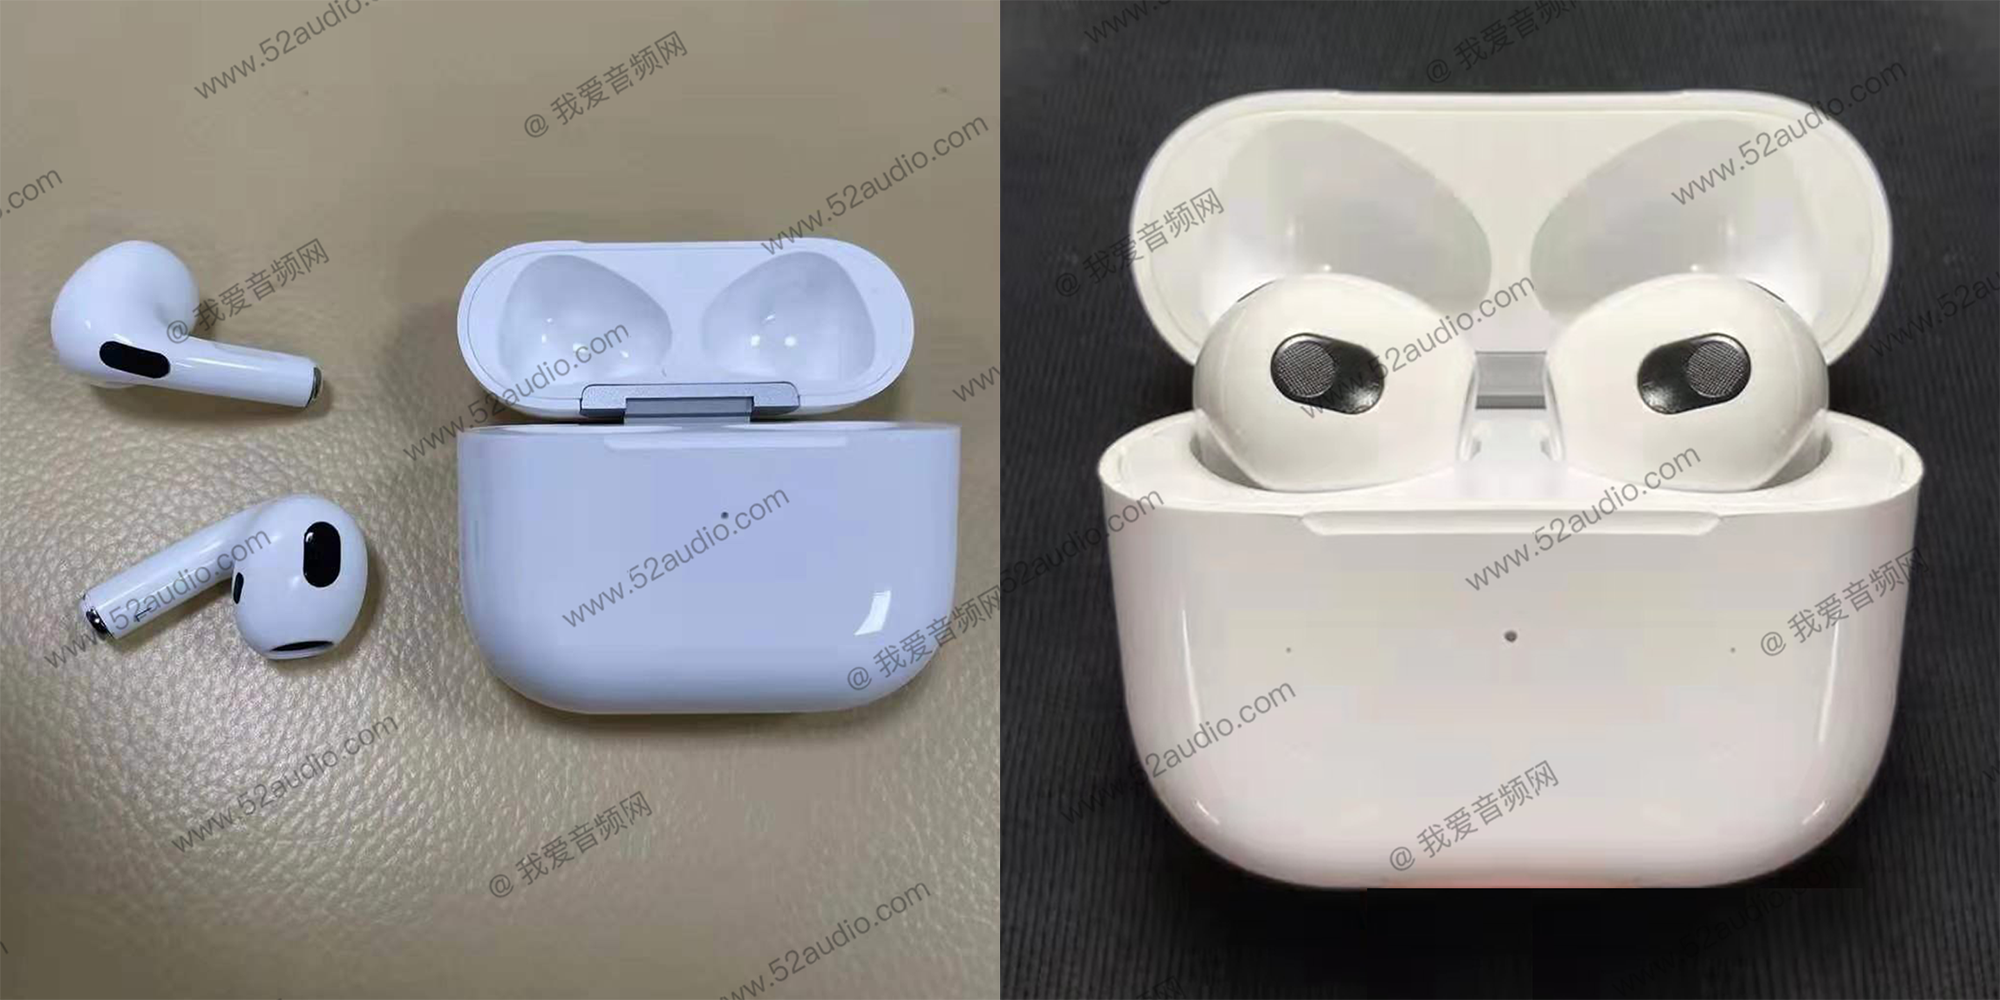 Next-gen AirPods enter production August; launch likely - 9to5Mac